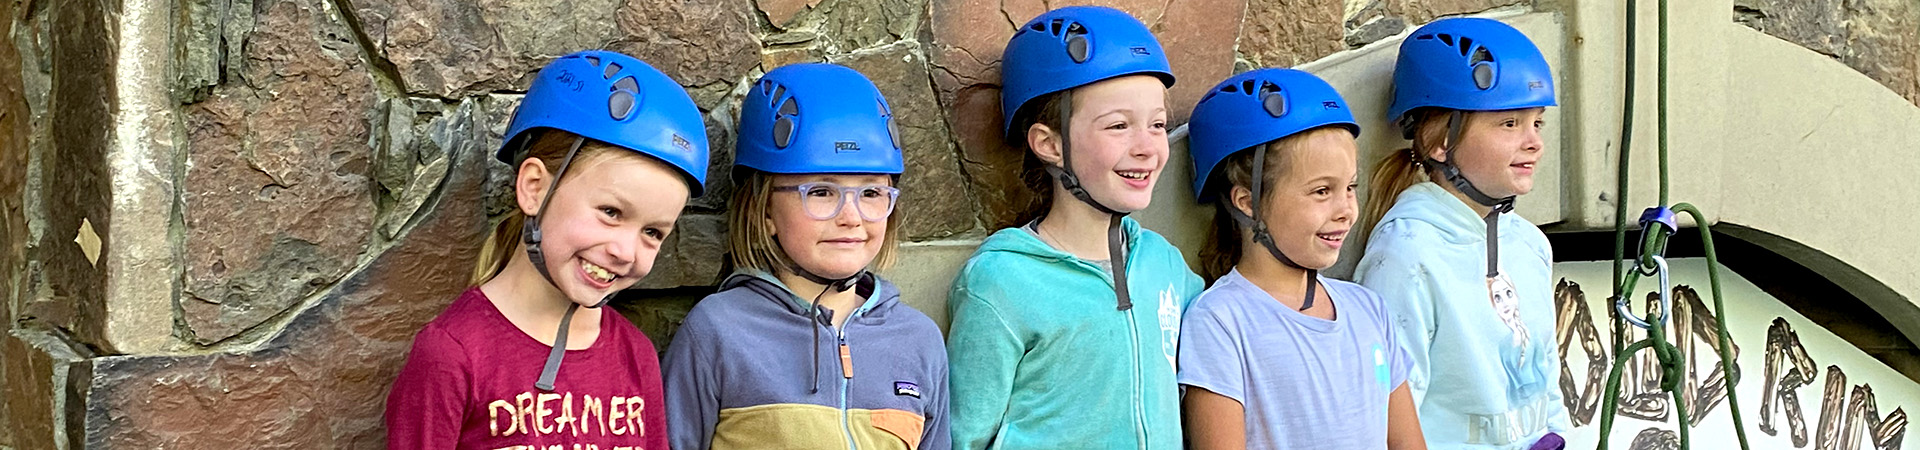  group of girl scouts with climbing helmets at camp 